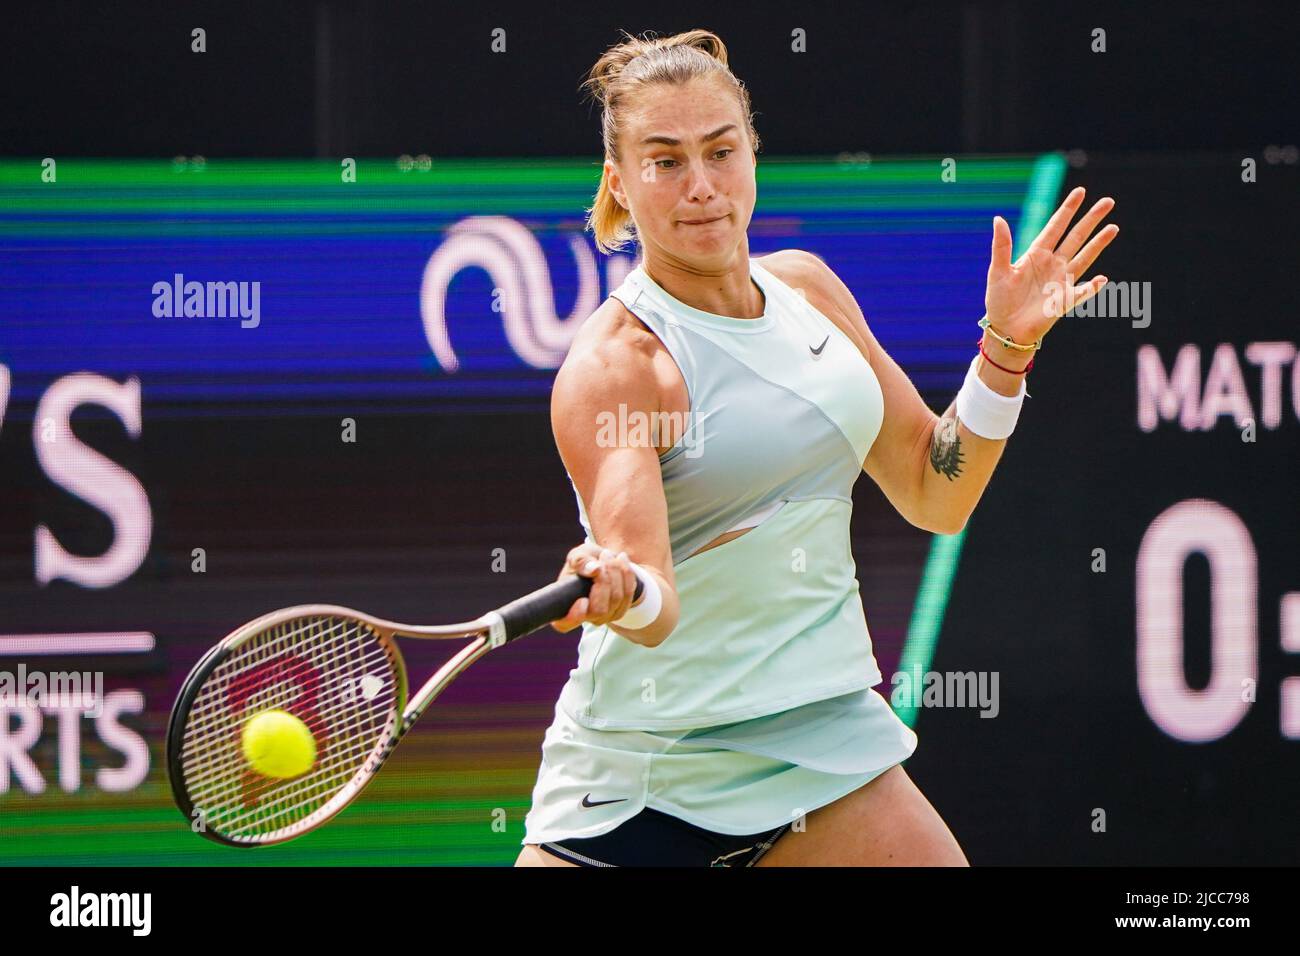 'S-HERTOGENBOSCH, NETHERLANDS - JUNE 12: Aryna Sabalenka of Belarus during the Womens Singles Final match between Aryna Sabalenka of Belarus and Ekaterina Alexandrova of Russia at the Autotron on June 12, 2022 in 's-Hertogenbosch, Netherlands (Photo by Joris Verwijst/BSR Agency) Credit: BSR Agency/Alamy Live News Stock Photo